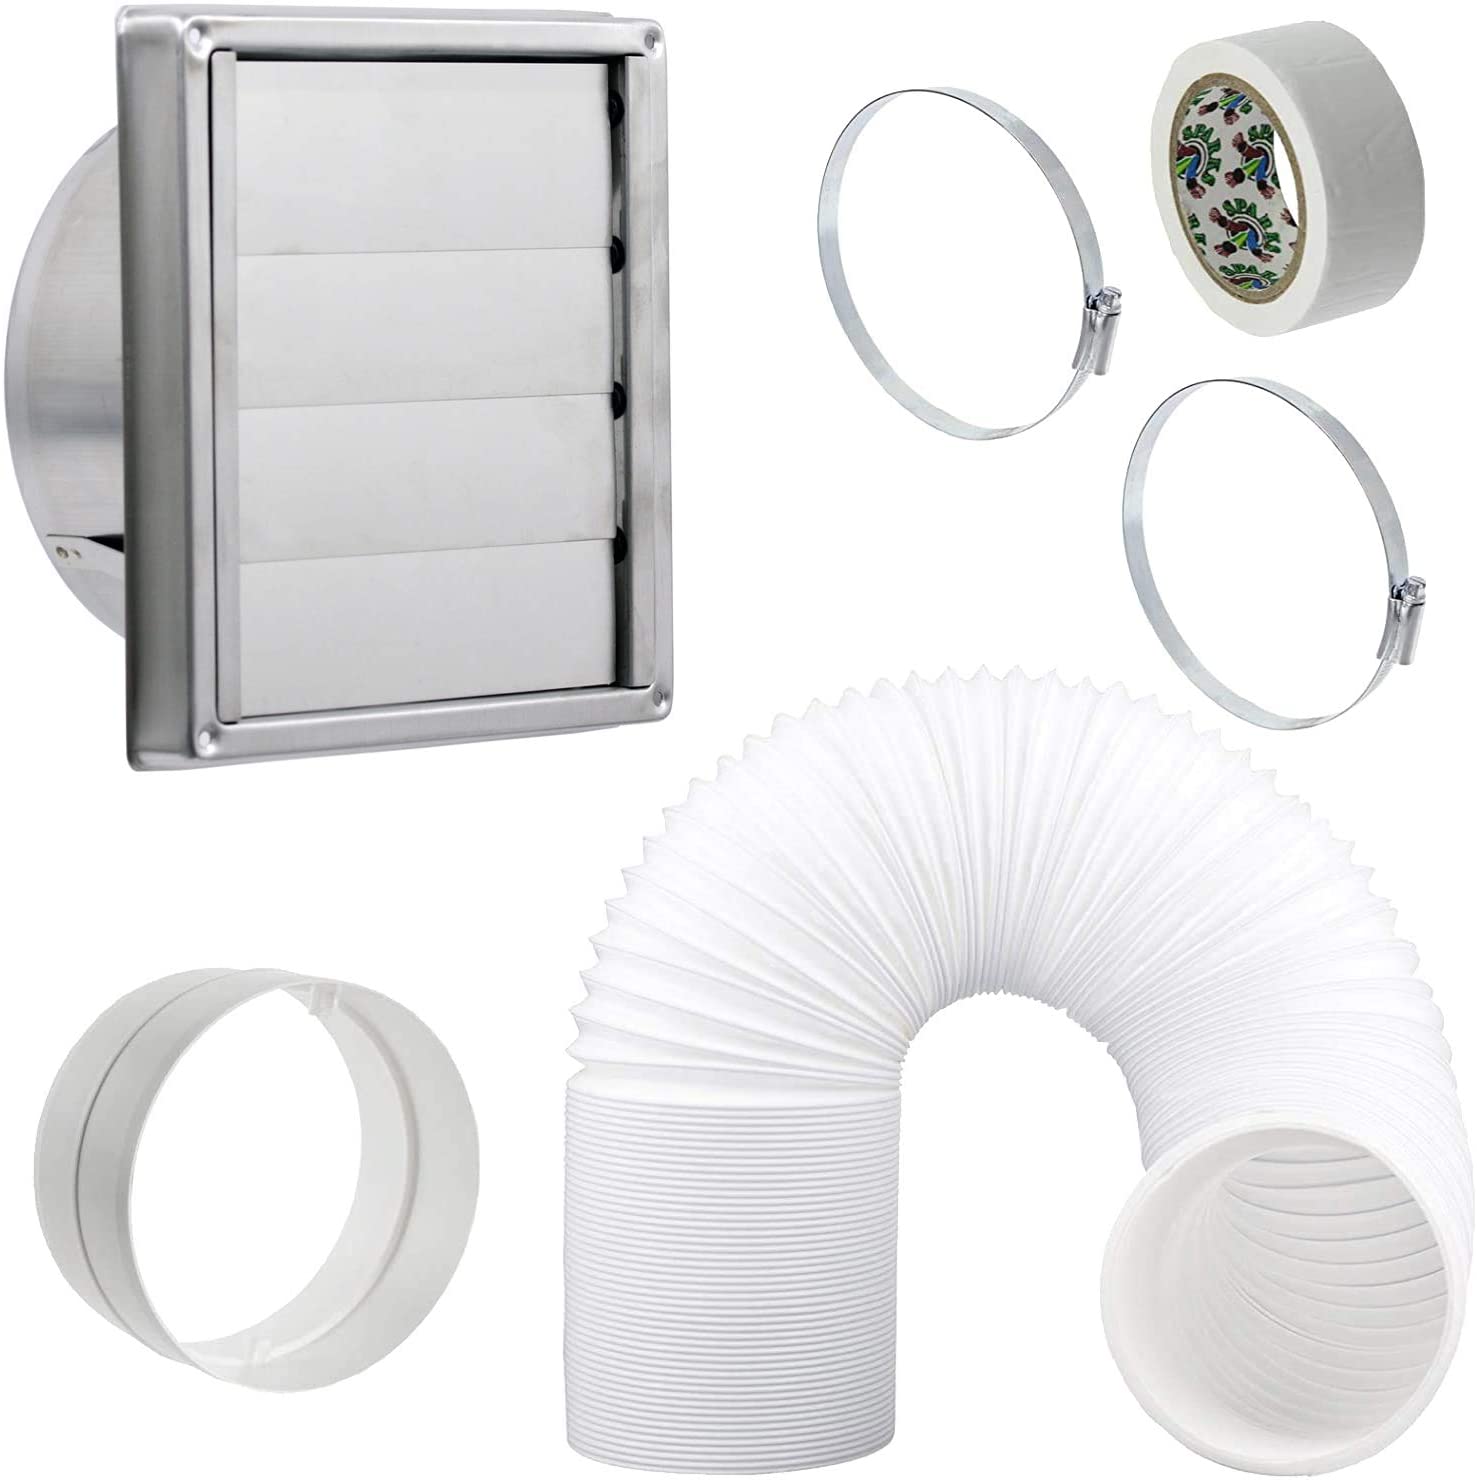 UNIVERSAL Square Exterior Wall Outlet Kit with Gravity Flaps & Extension Hose for Vented Tumble Dryer Air Conditioning Cooker Hood (5" x 3m, Stainless Steel)